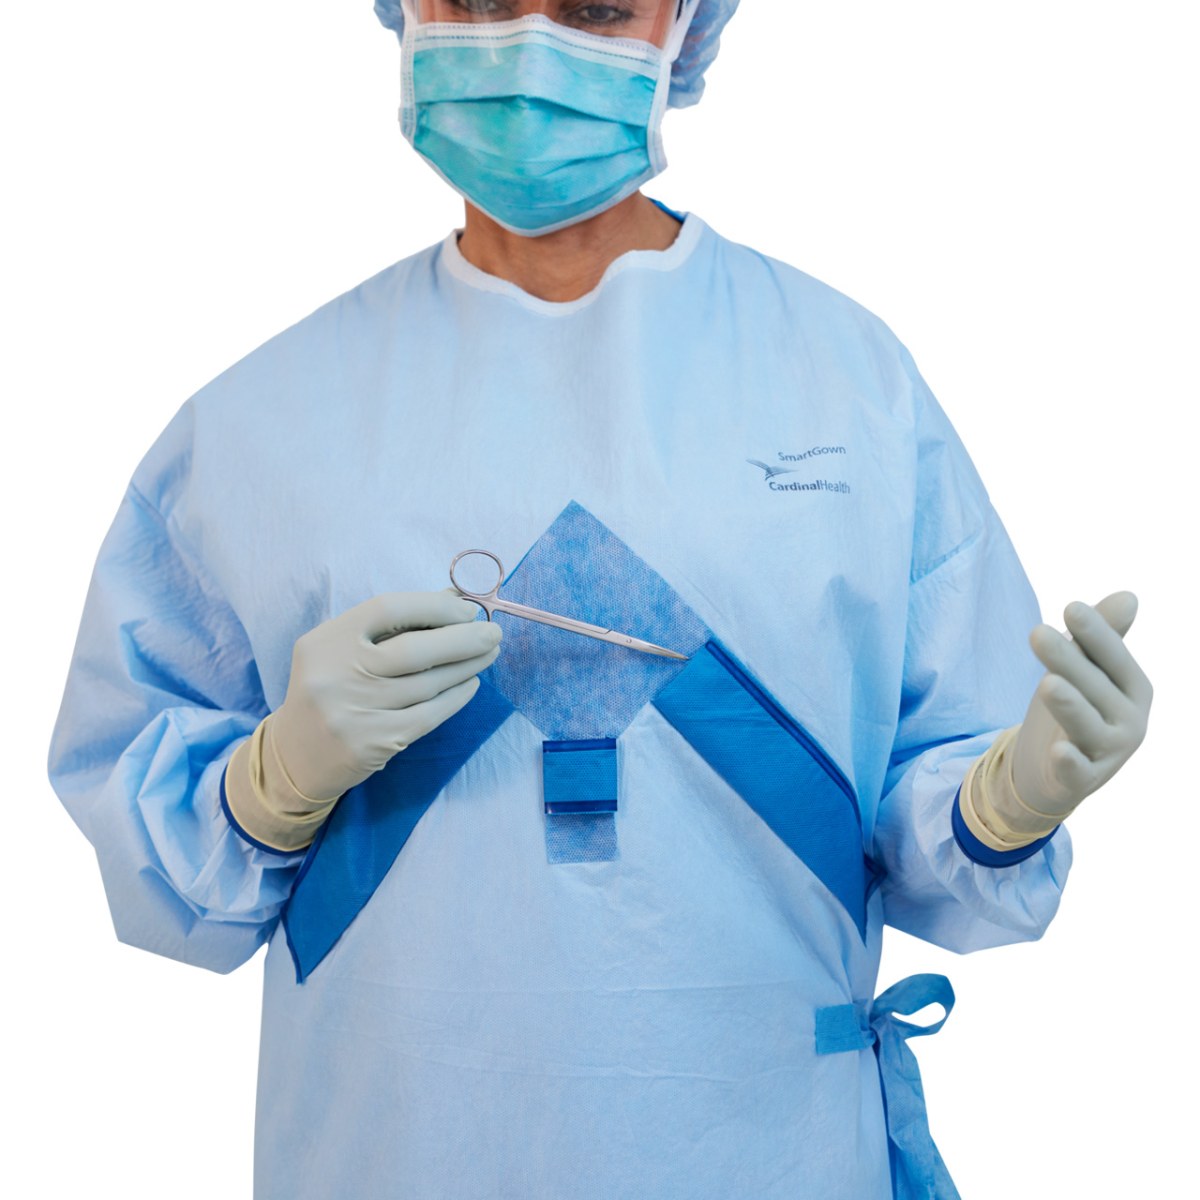 Donning and Removing Gown, Gloves, and Mask - YouTube